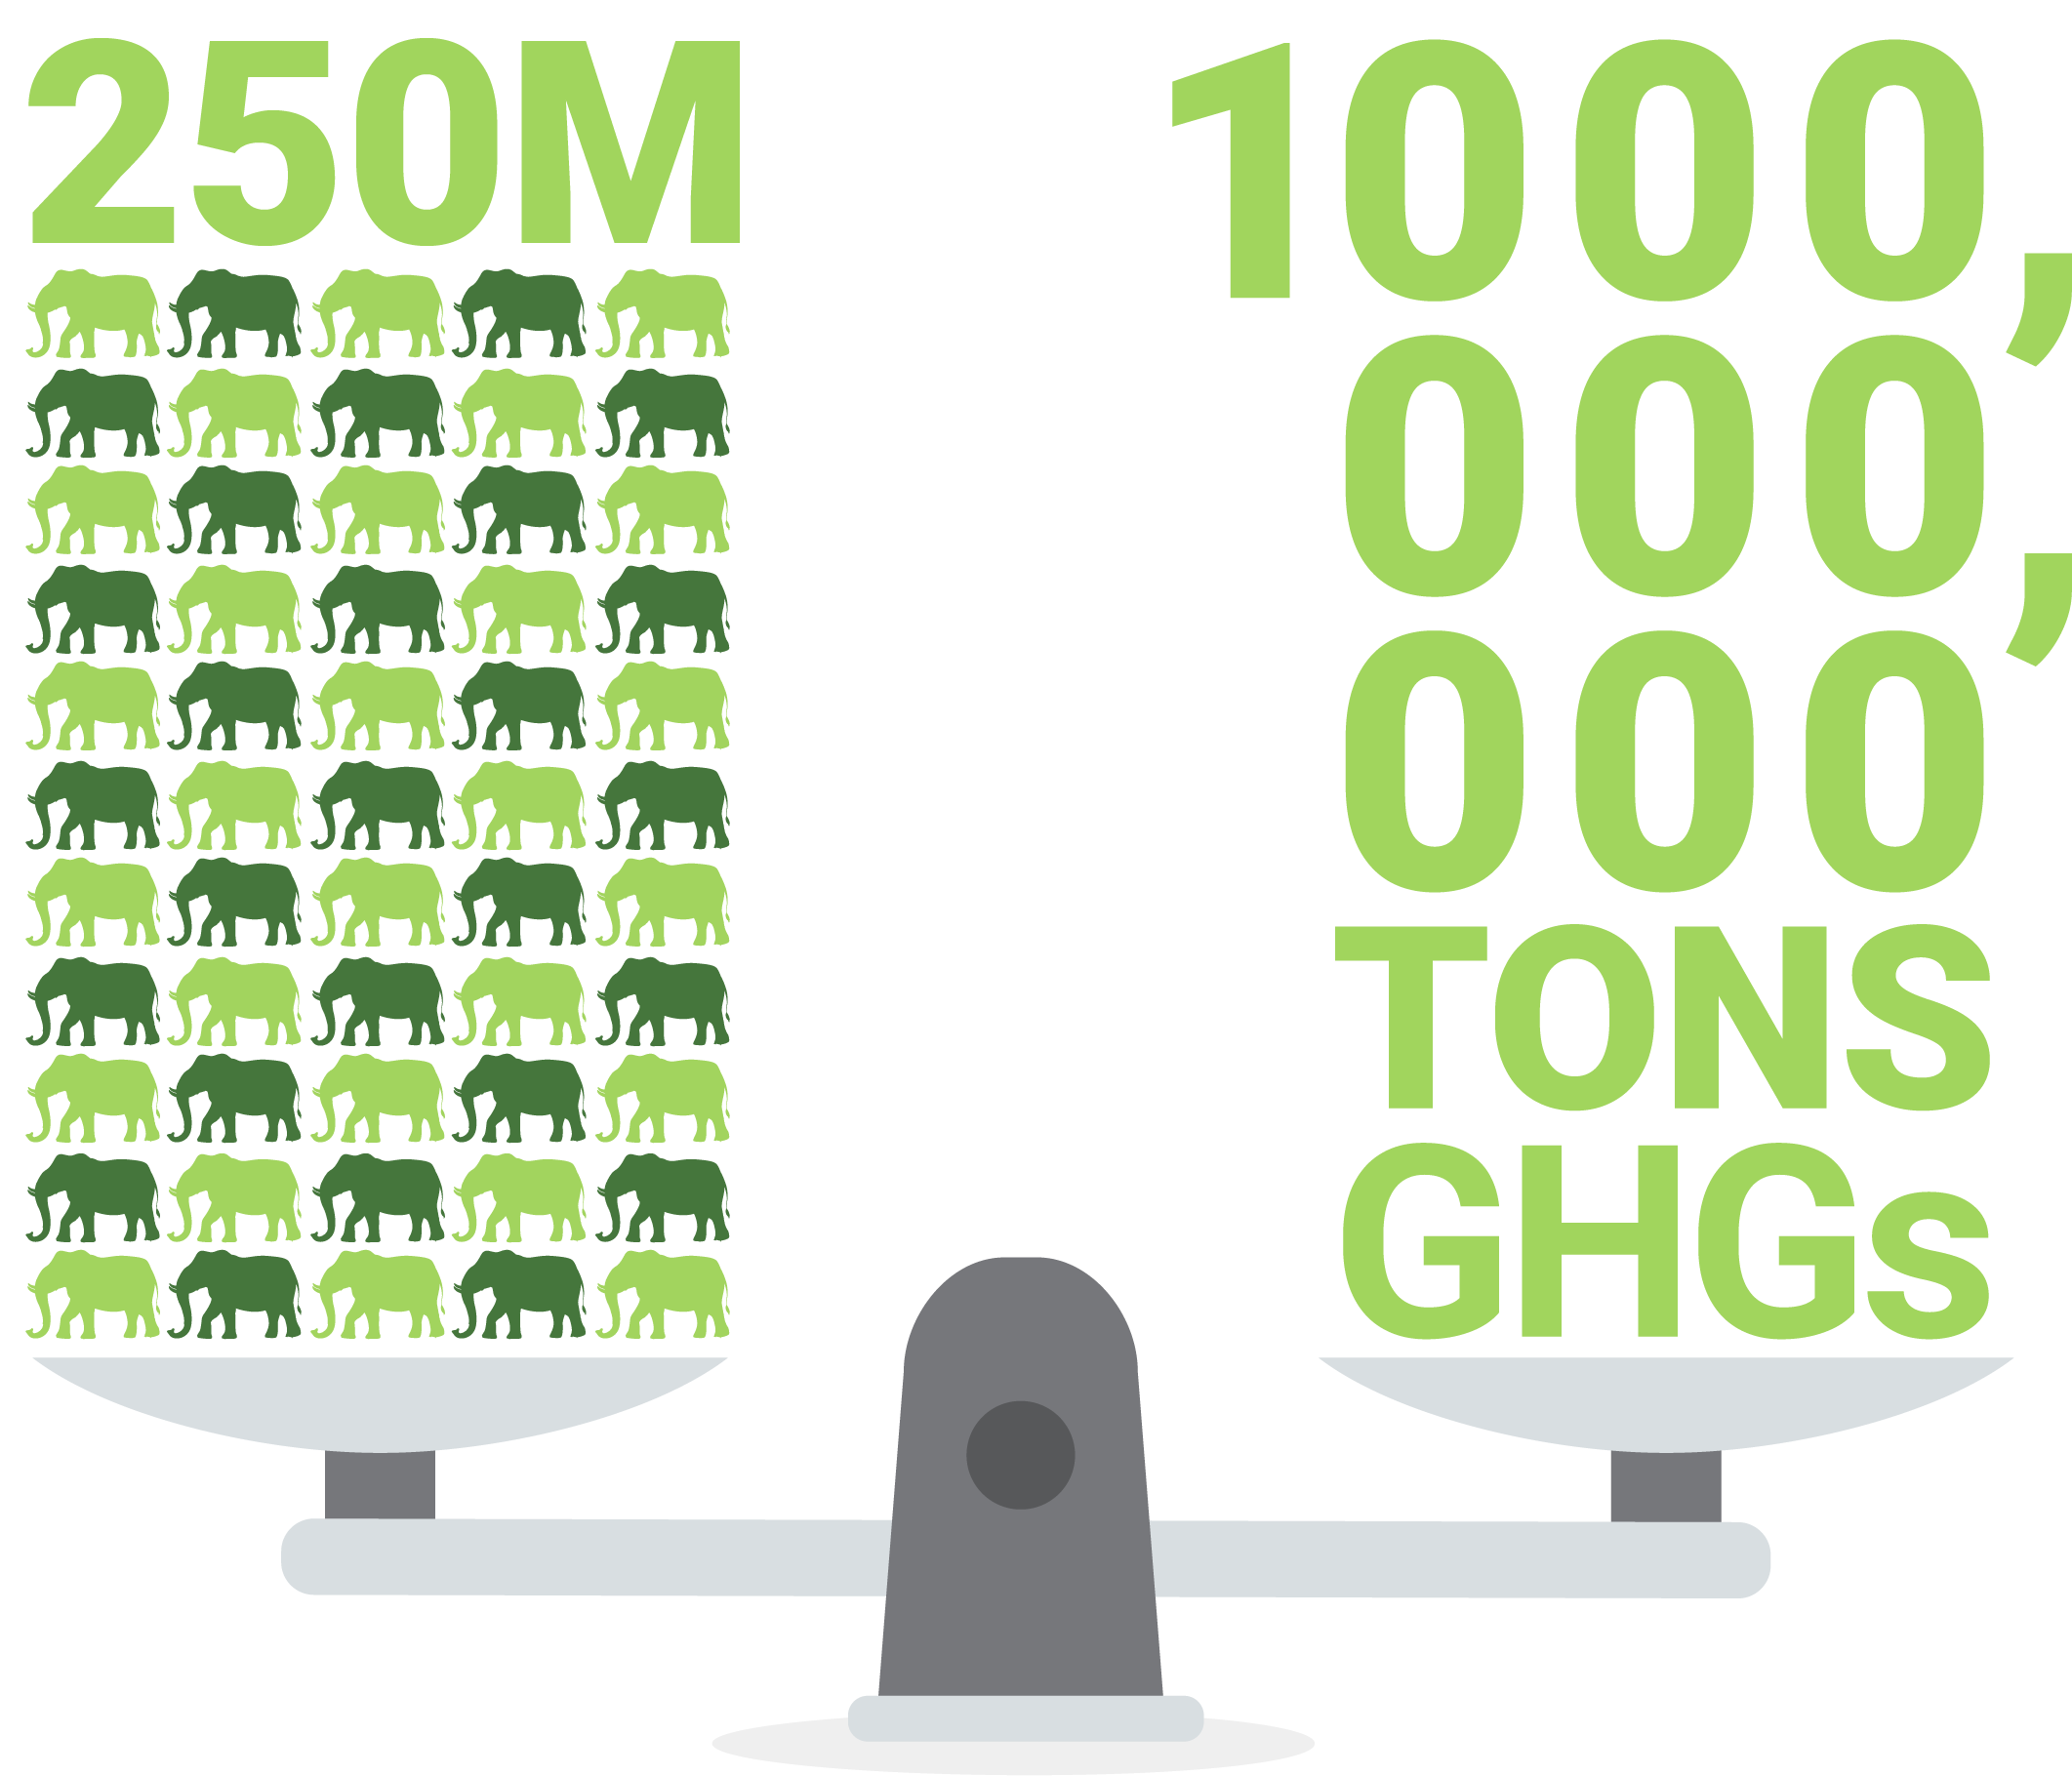 A graphic of a weight scale to represent the equivalency of the weight of 250 million elephants to 1 gigaton of greenhouse gas emissions